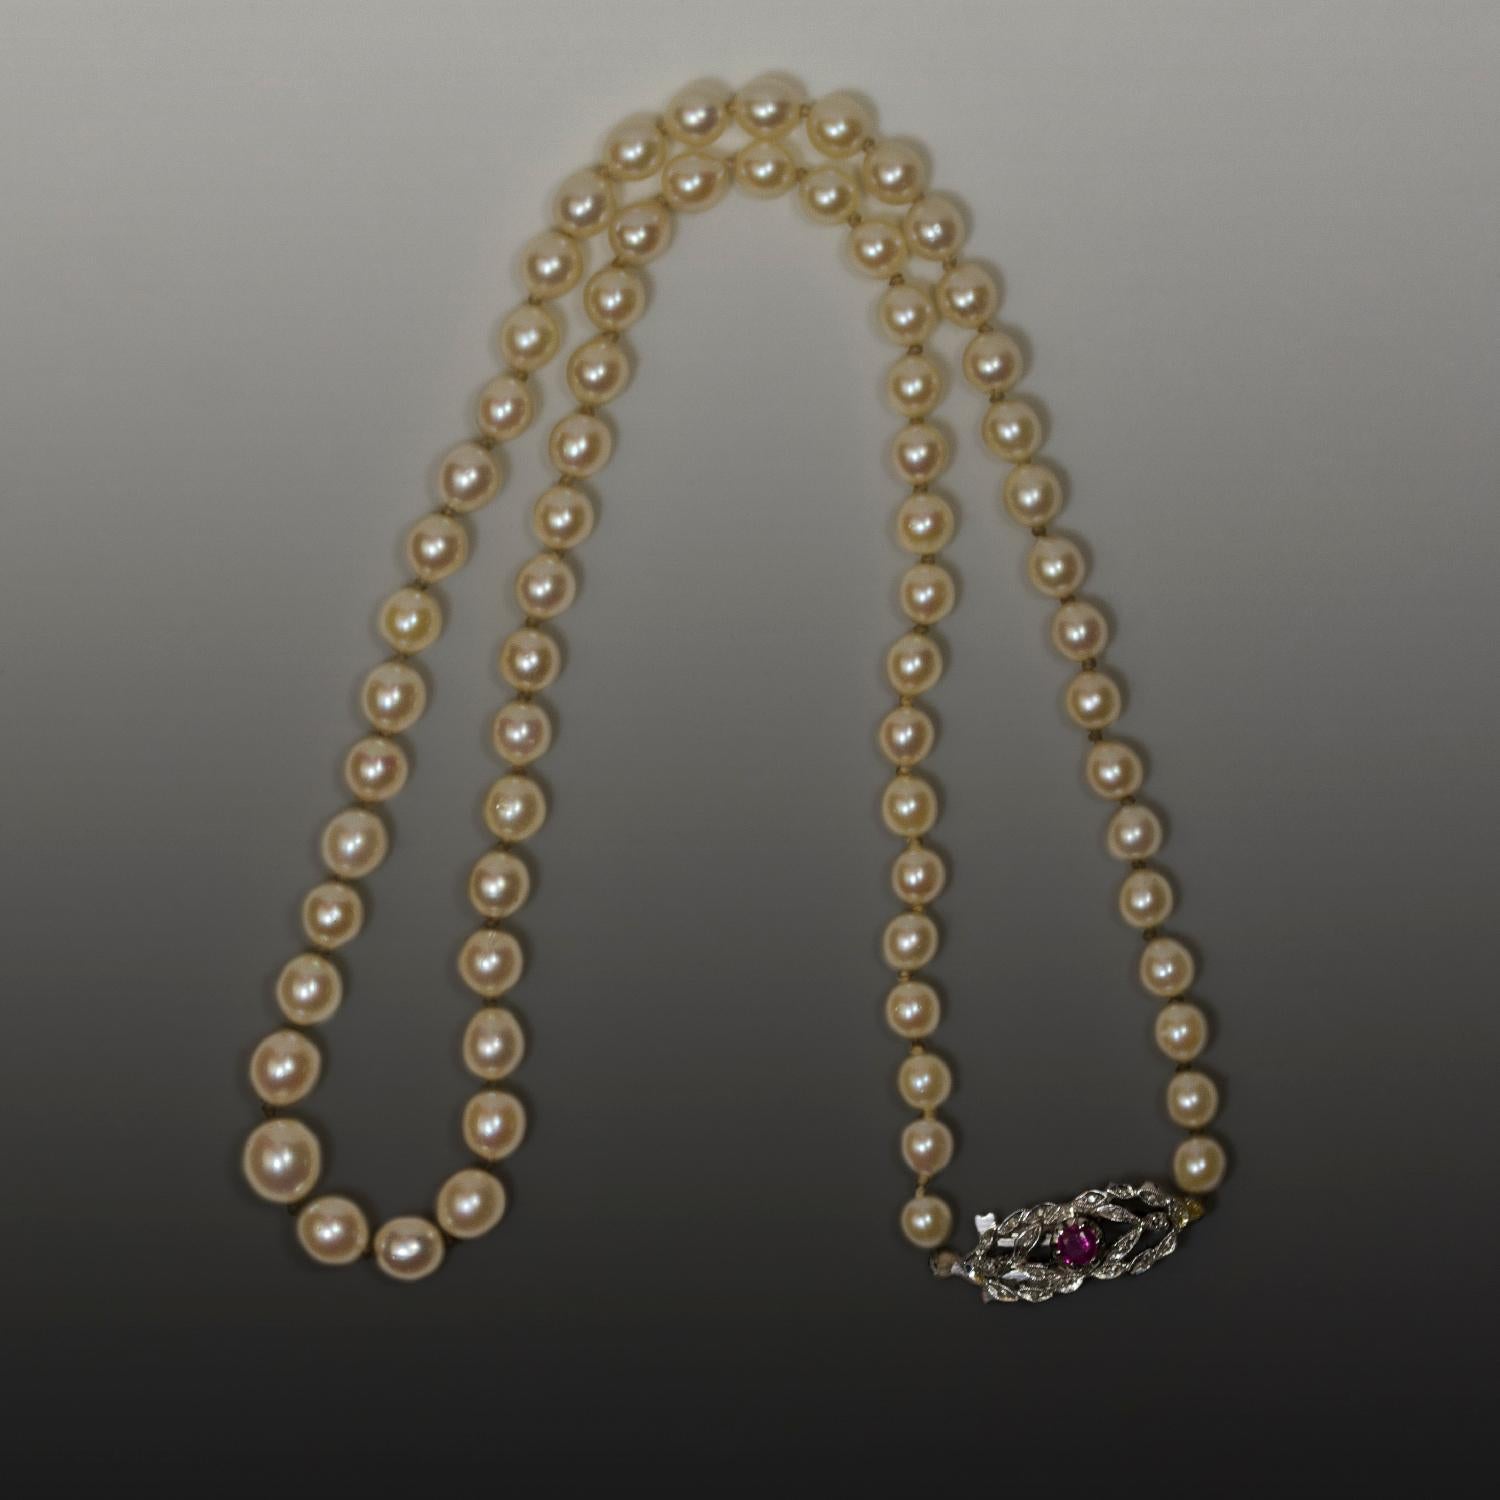 Help please , are these original Mikimoto pearls ? | PriceScope